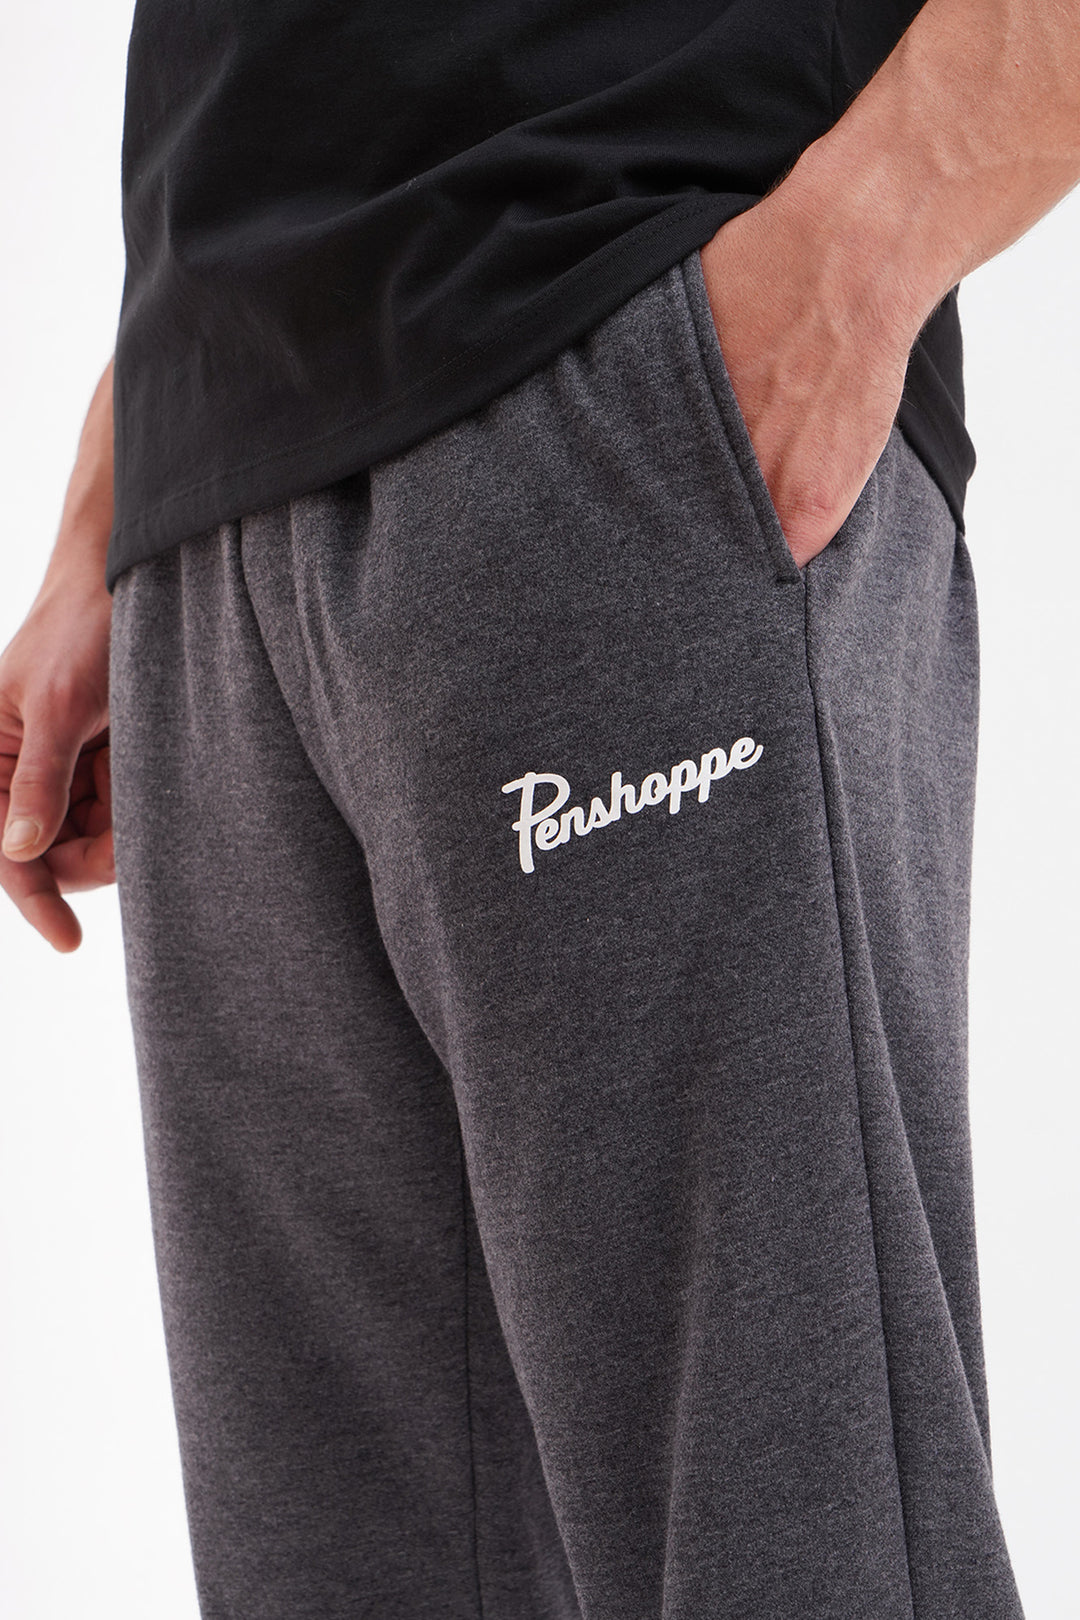 Loose Fit Jogger Pants with Penshoppe Branding